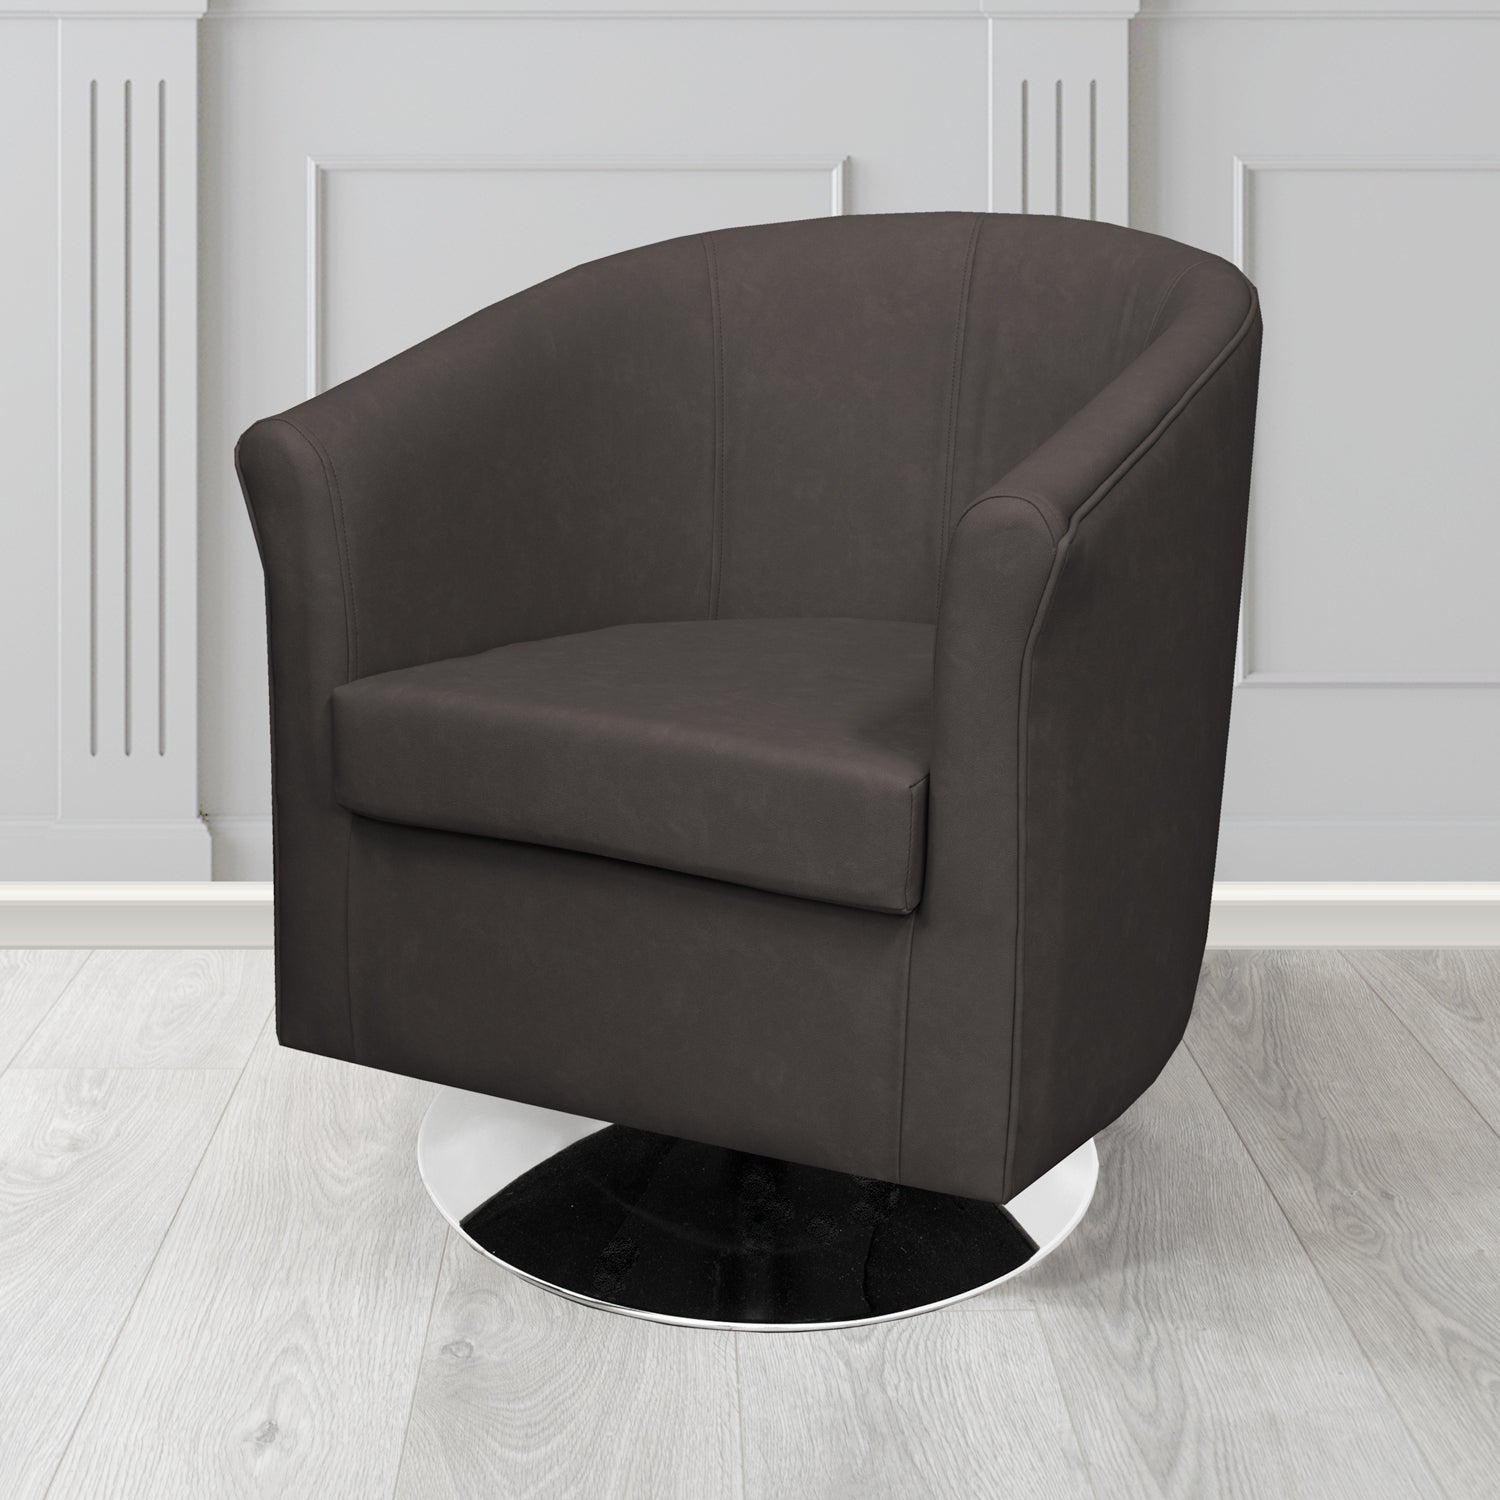 Tuscany Swivel Tub Chair in Infiniti Nugget INF1852 Antimicrobial Crib 5 Faux Leather - The Tub Chair Shop